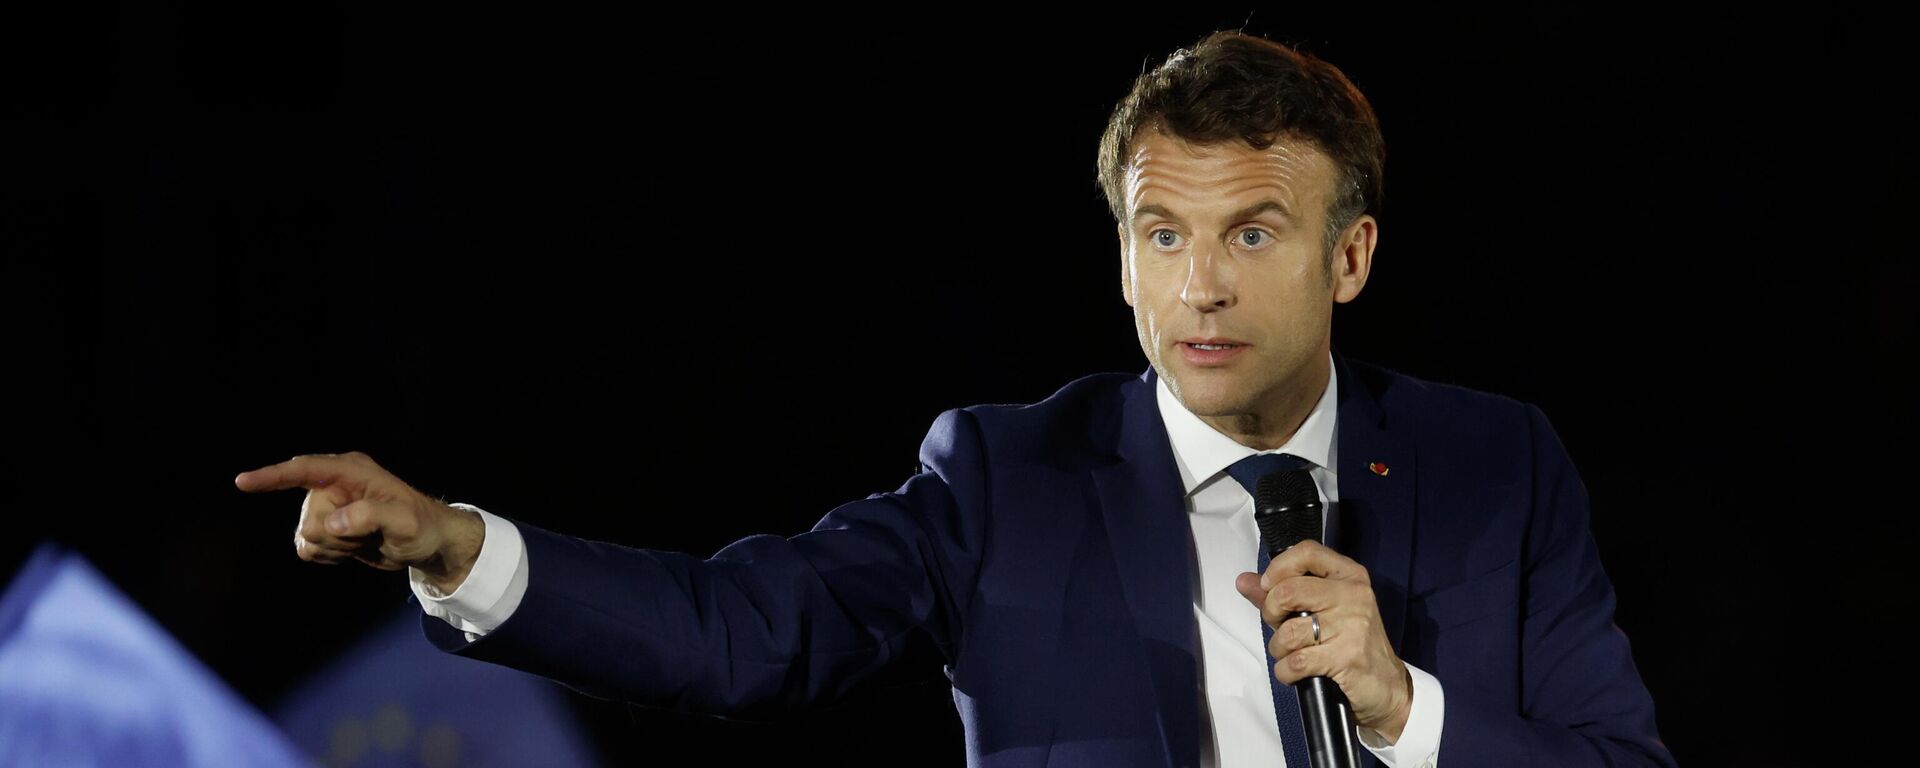 Current French President and centrist presidential candidate for reelection Emmanuel Macron delivers a speech during a campaign rally in Strasbourg, eastern France, Tuesday, April 12, 2022 . Macron, with strong pro-European views, and far-right candidate Marine Le Pen, an anti-immigration nationalist, are facing each other in the presidential runoff on April 24. (AP Photo/Jean-Francois Badias) - Sputnik International, 1920, 03.06.2022